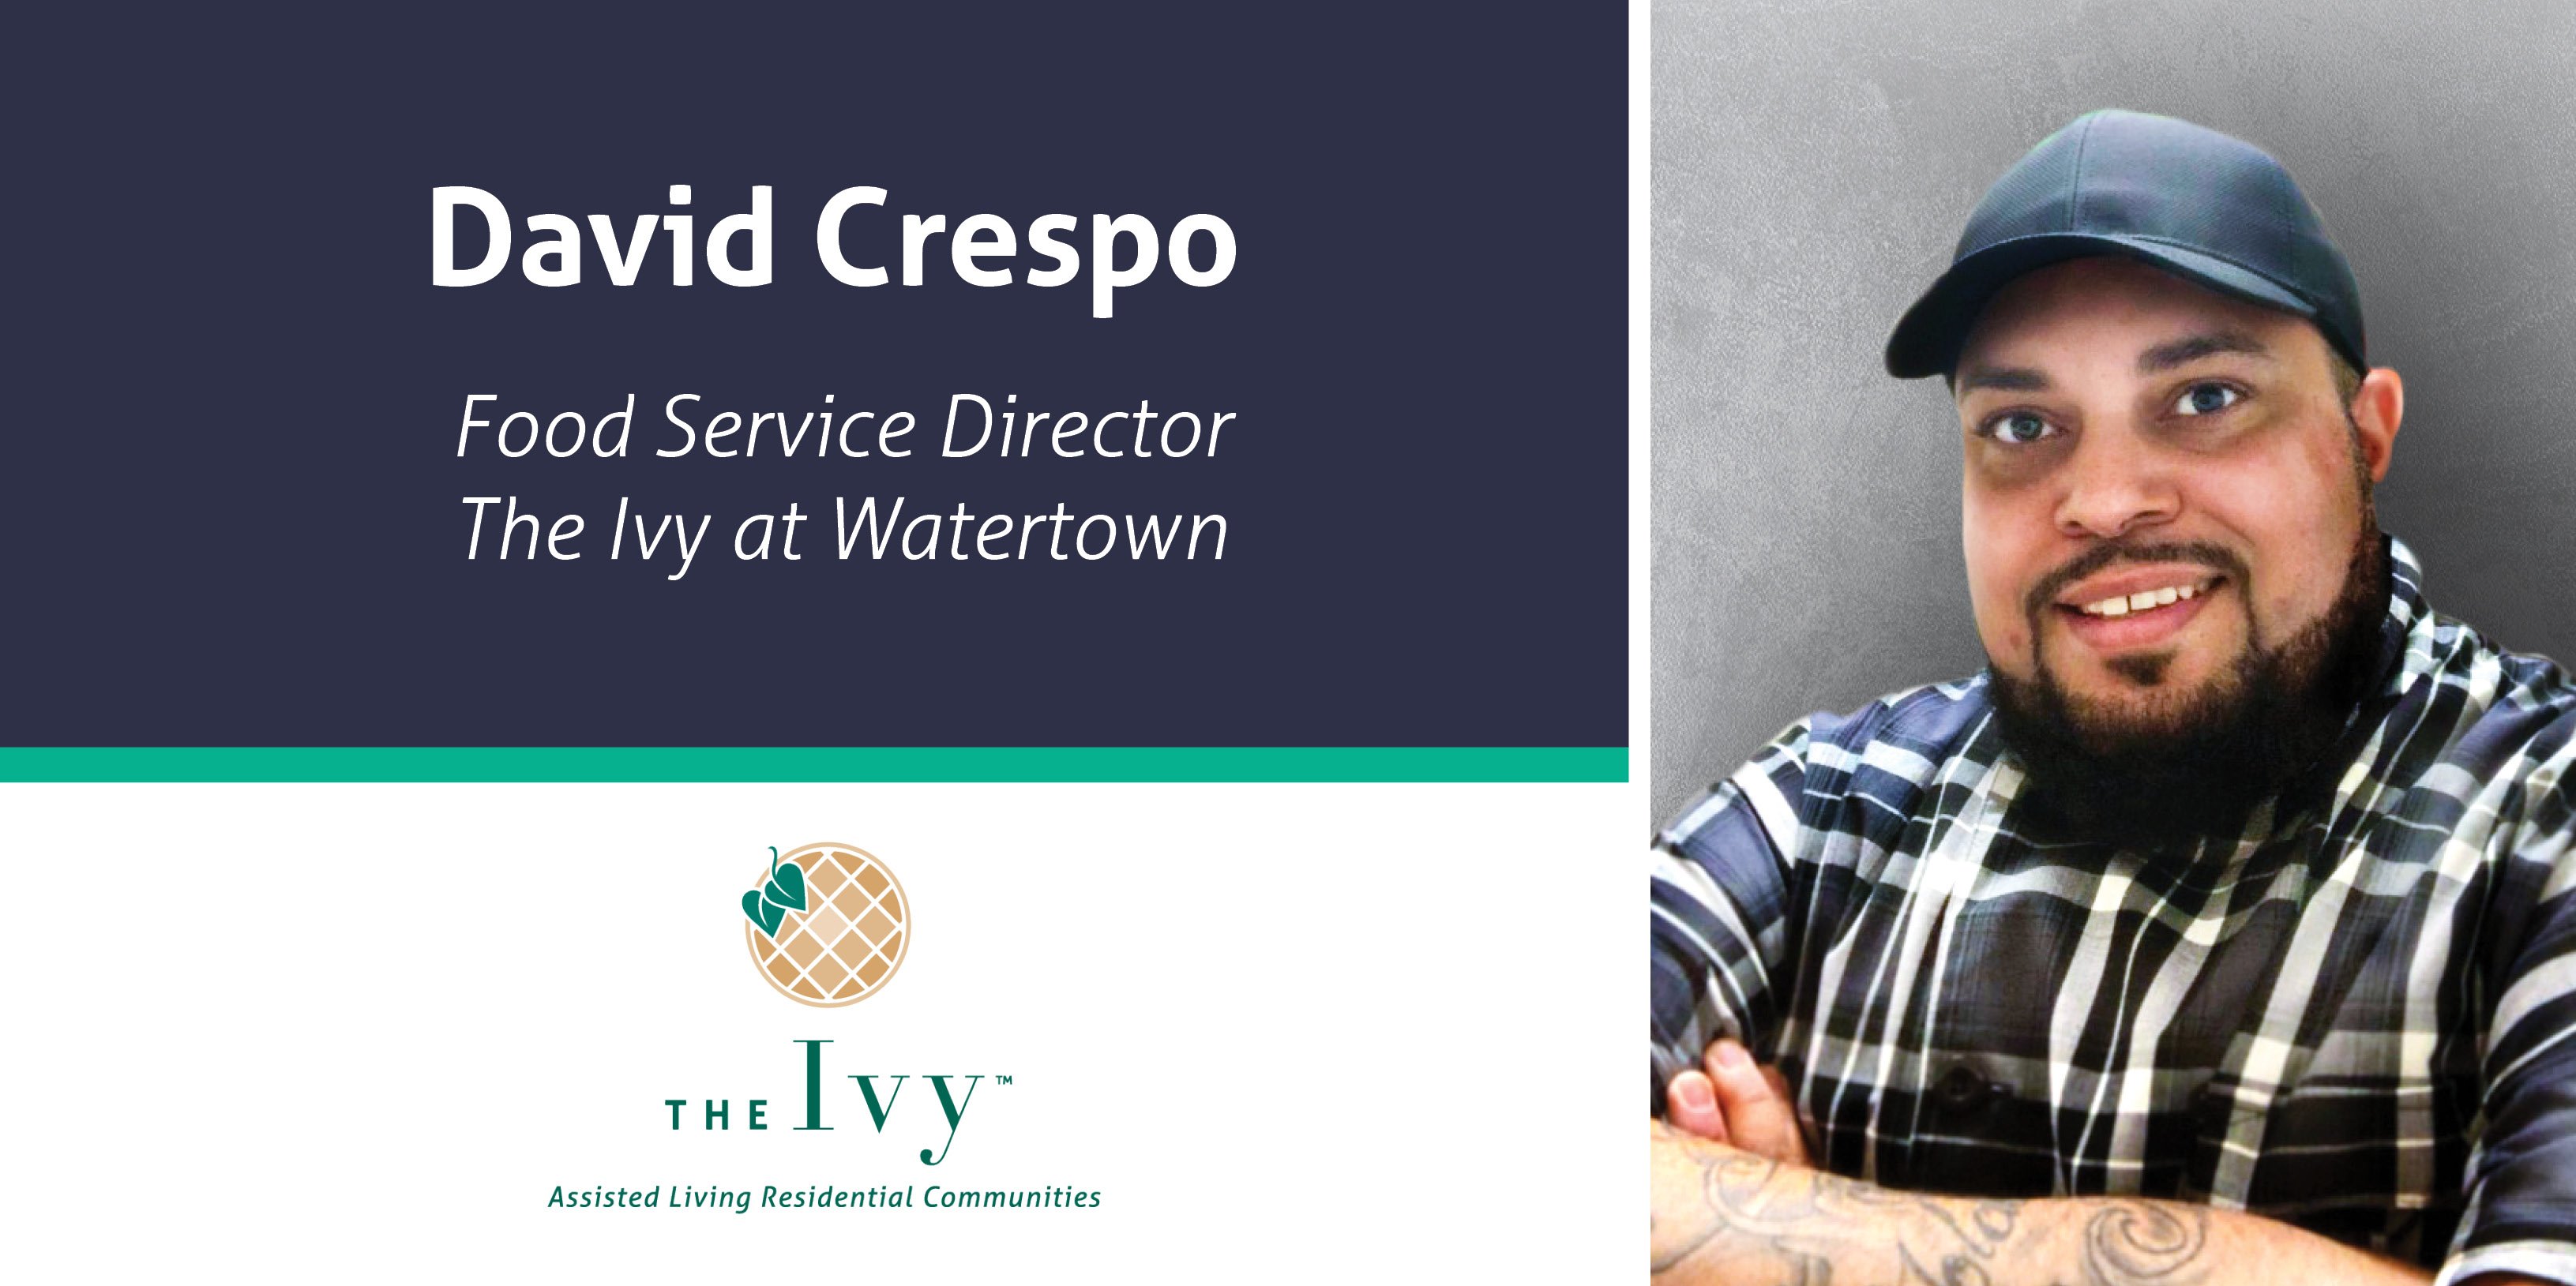 Meet David Crespo, the Food Service Director of The Ivy at Watertown